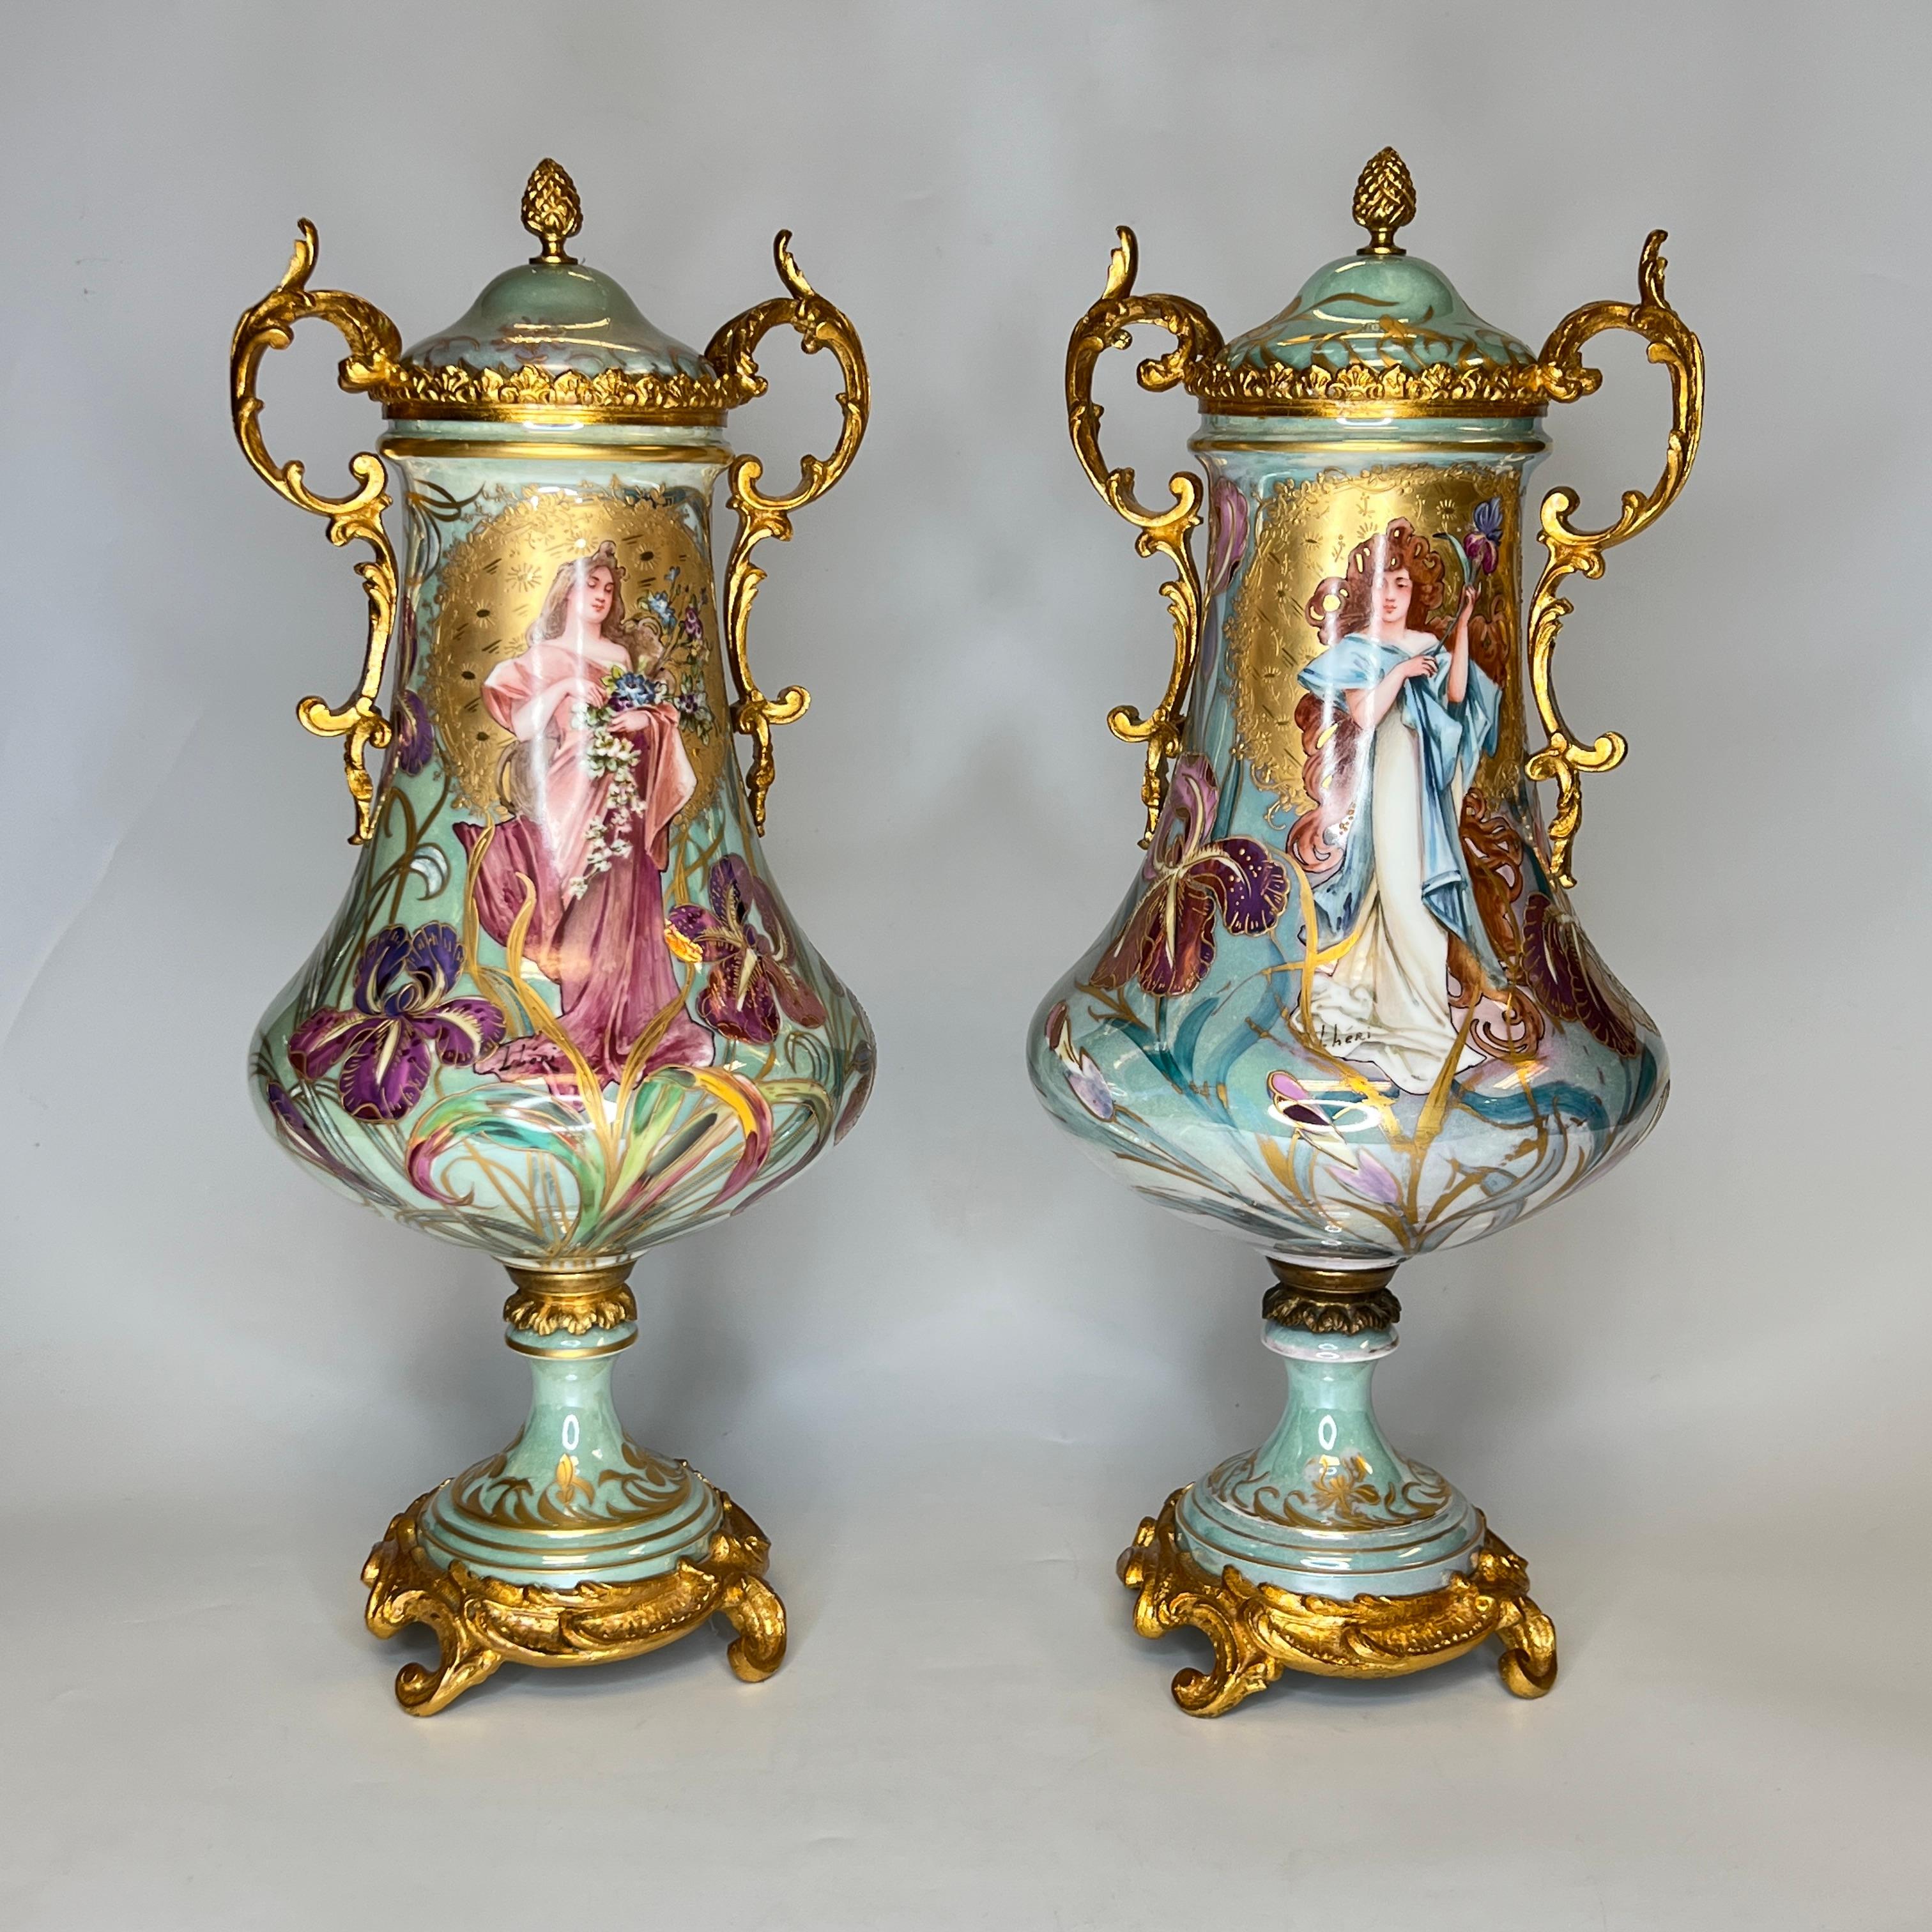 Pair of Art Nouveau Sevres Style Iridescent Porcelain Vases and Covers by Lheri For Sale 11